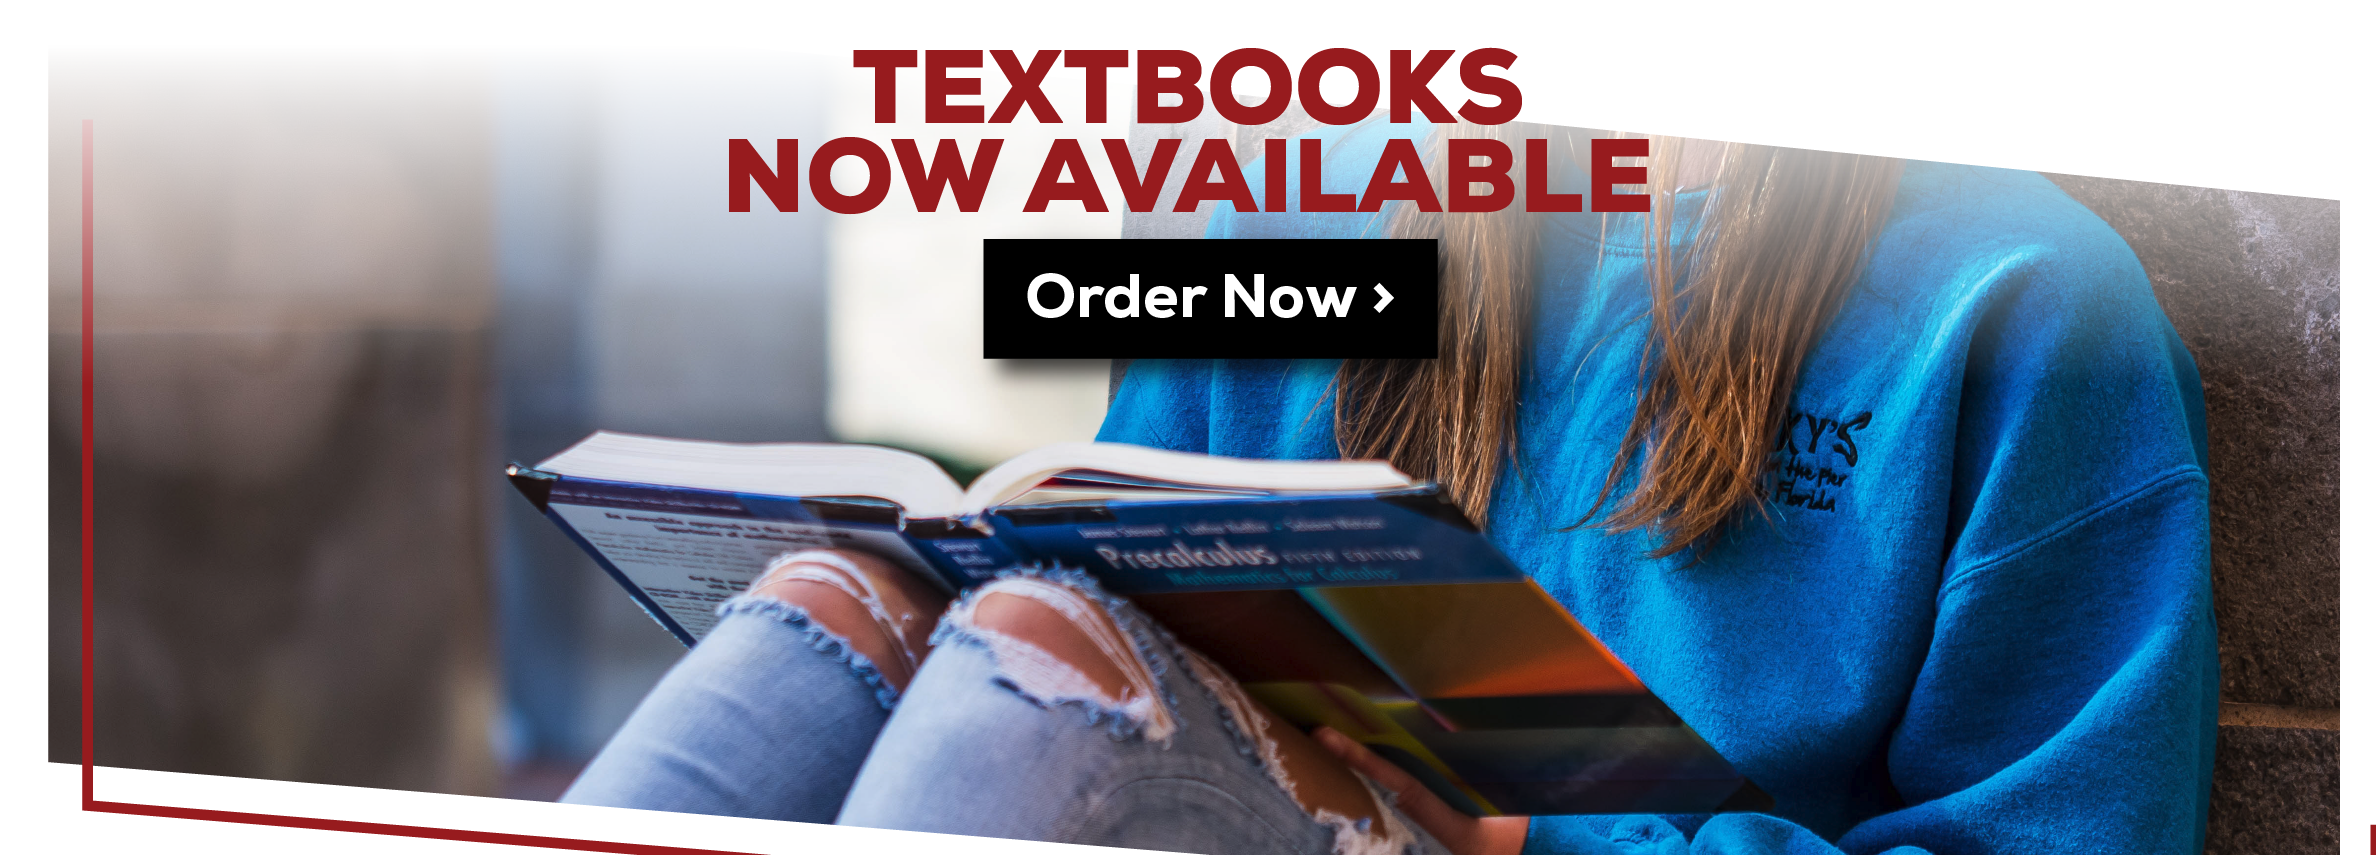 TEXTBOOKS NOW AVAILABLE Order Now